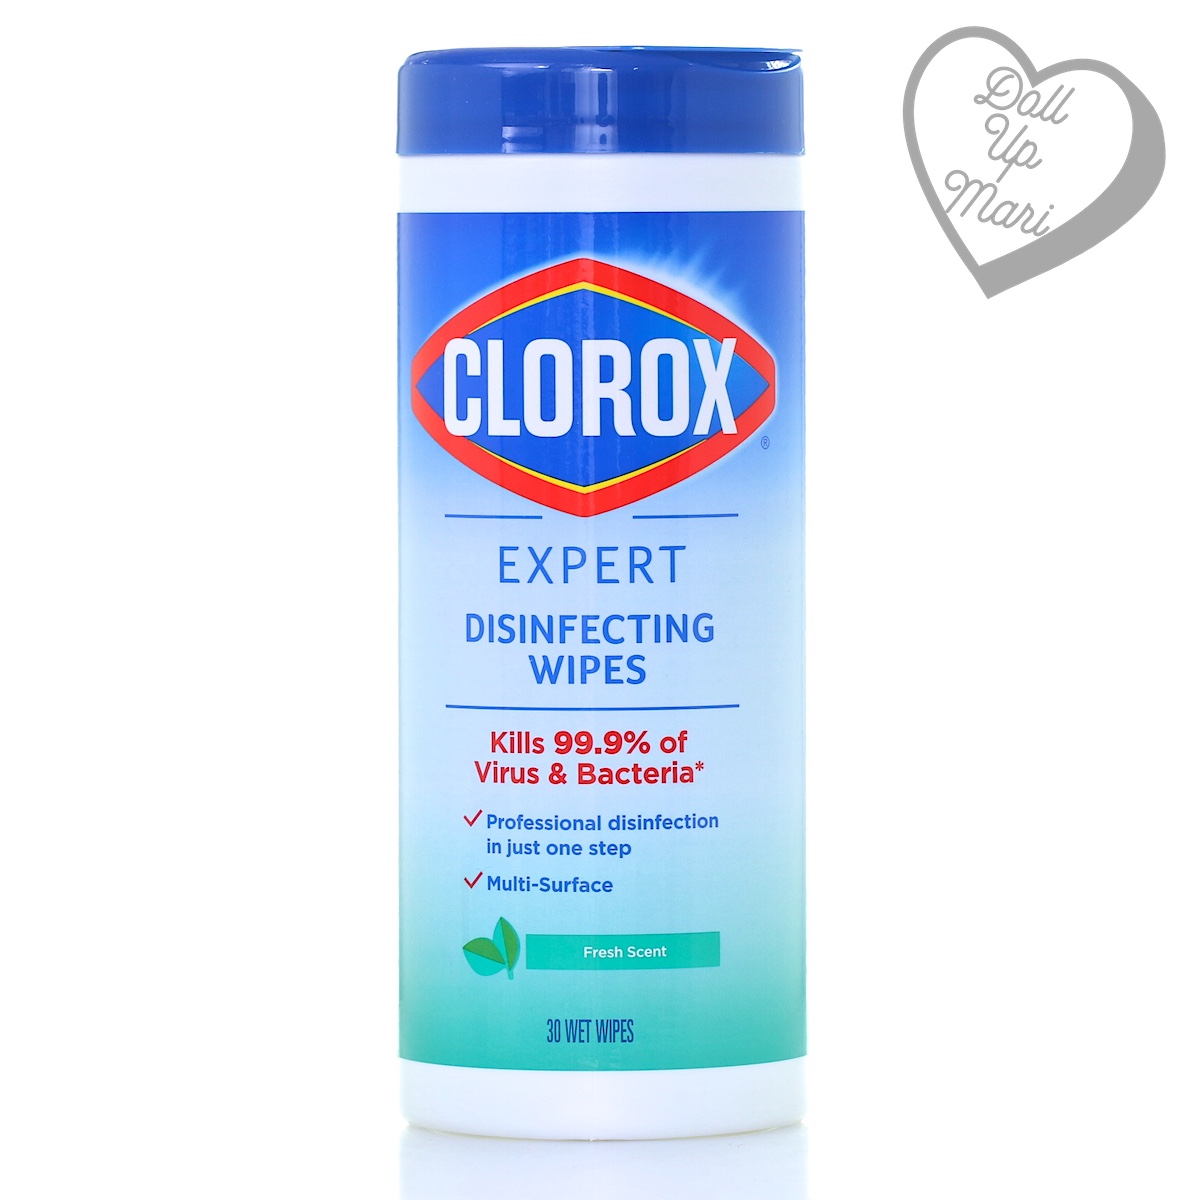 Pack shot of Clorox Expert Disinfecting Wipes